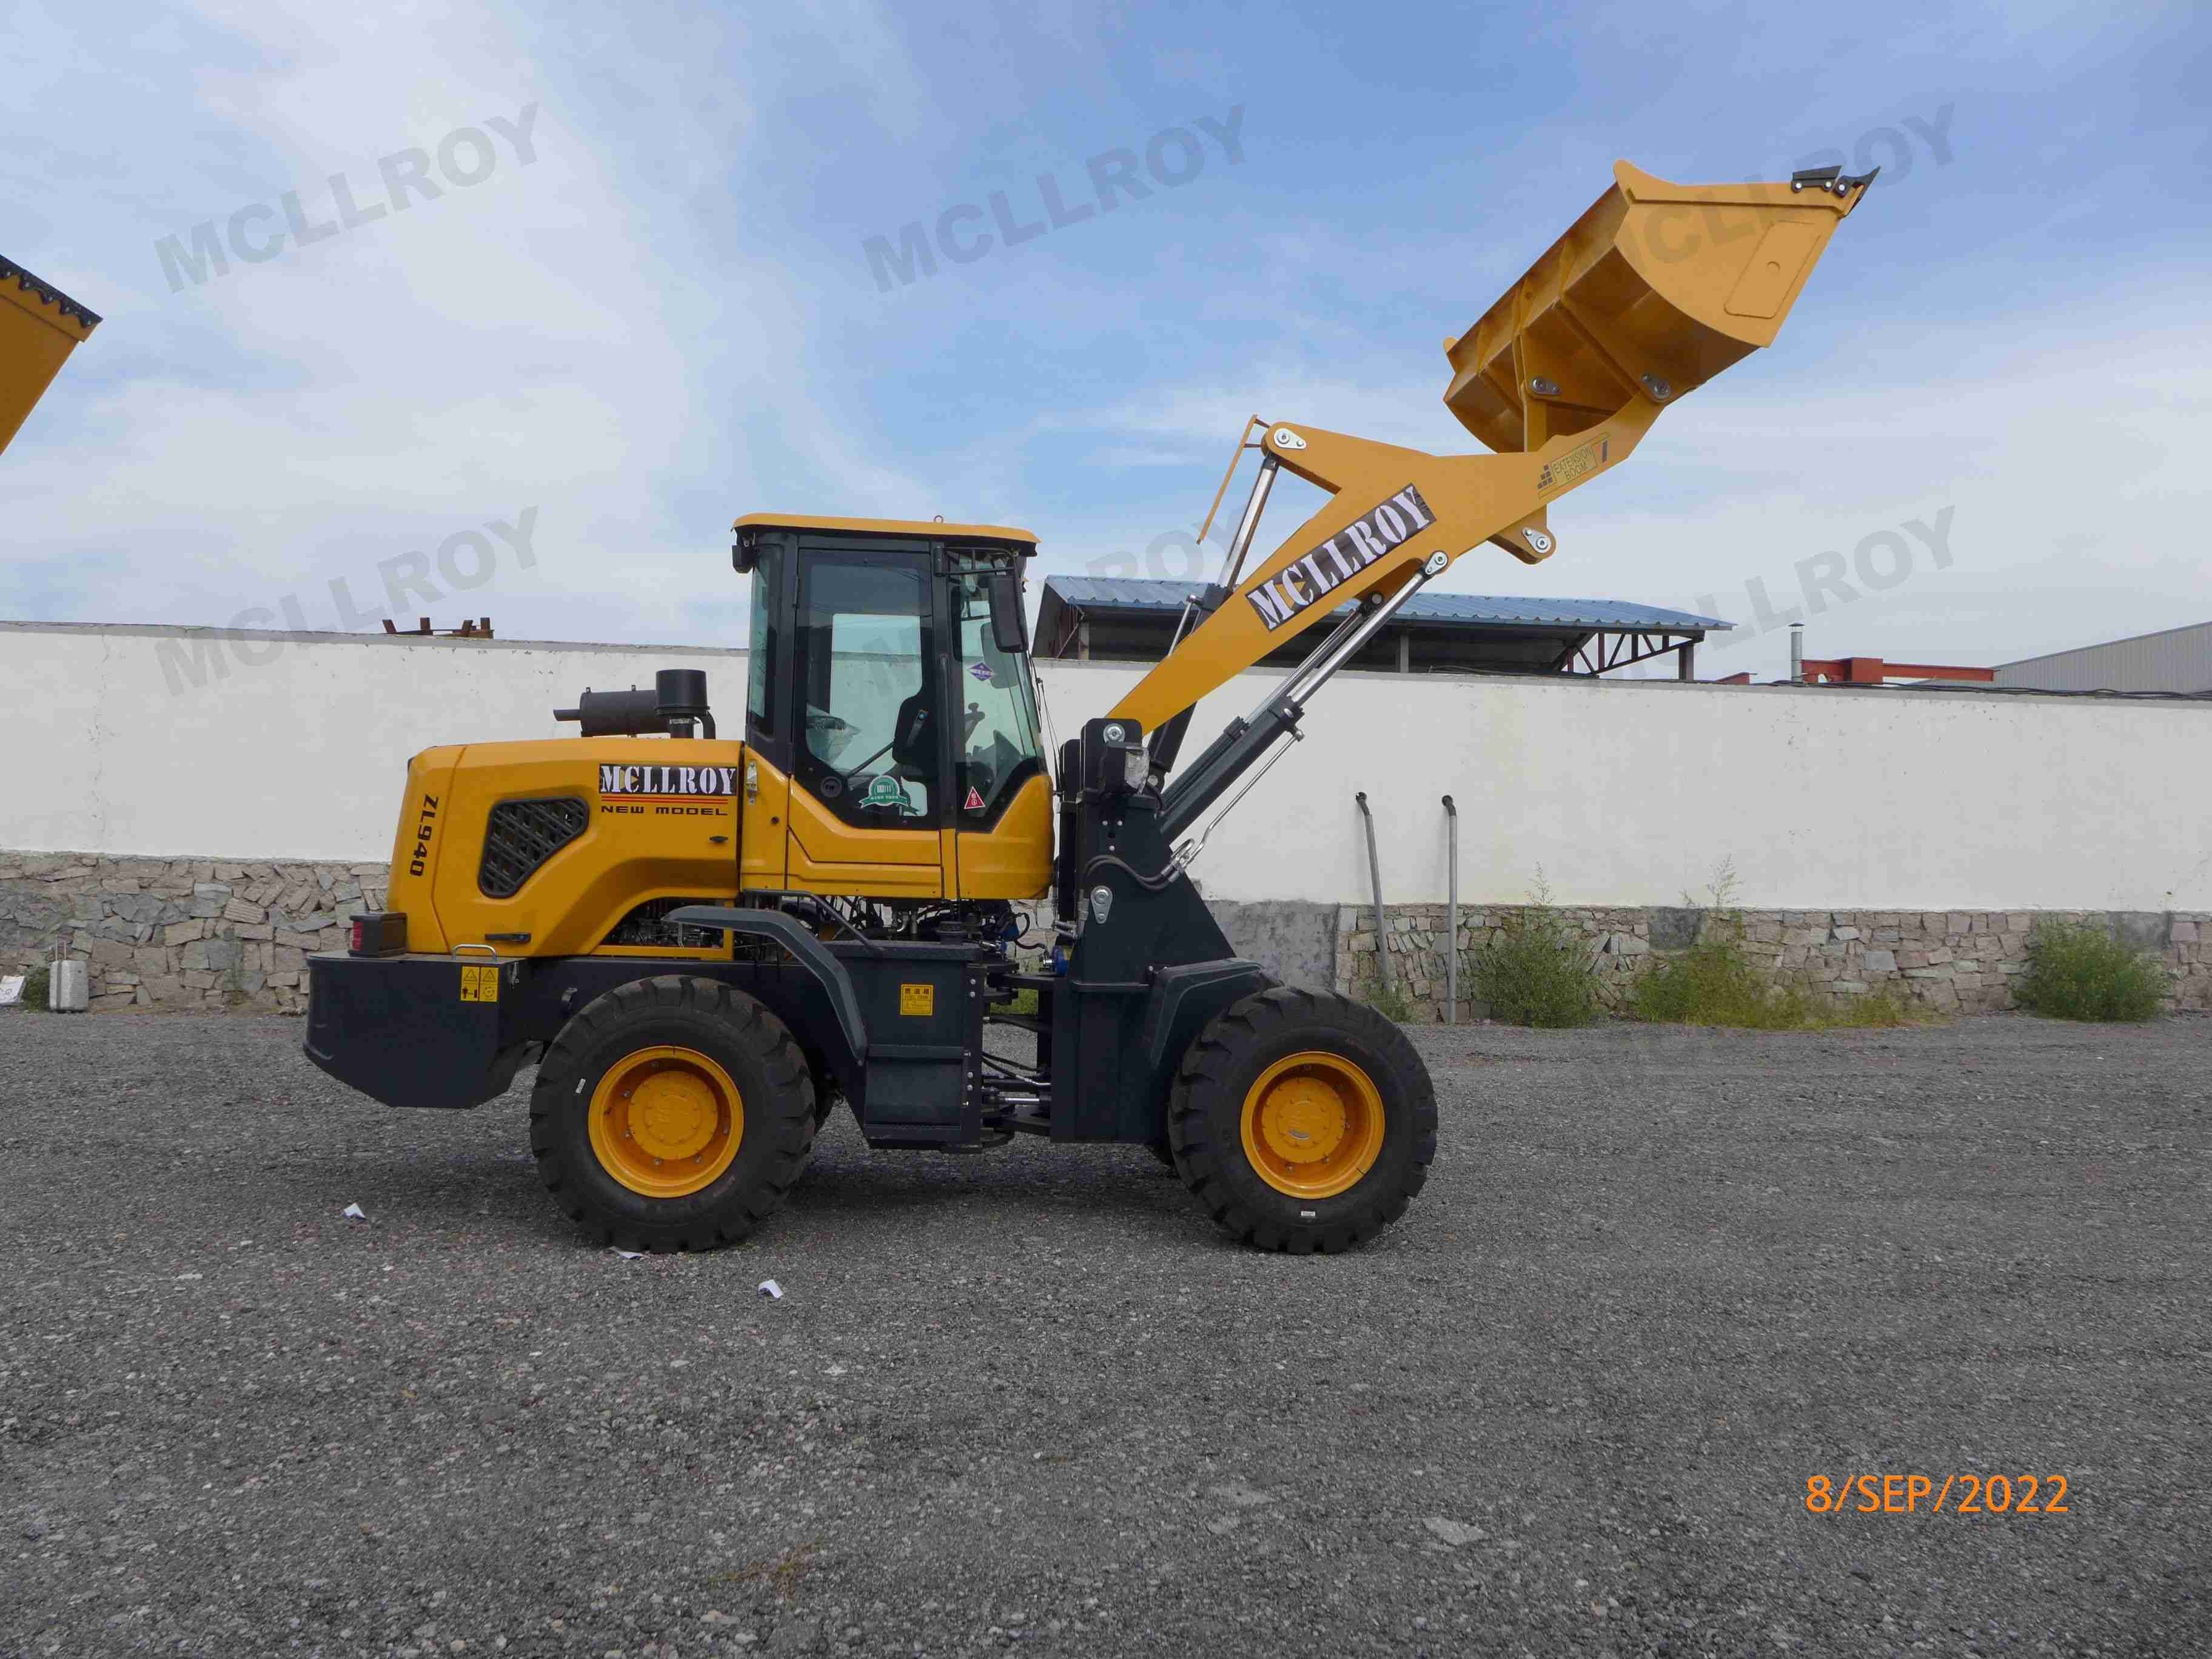 Mechanical Joystick Compact Articulated Wheel Loader Heavy Equipment Front End